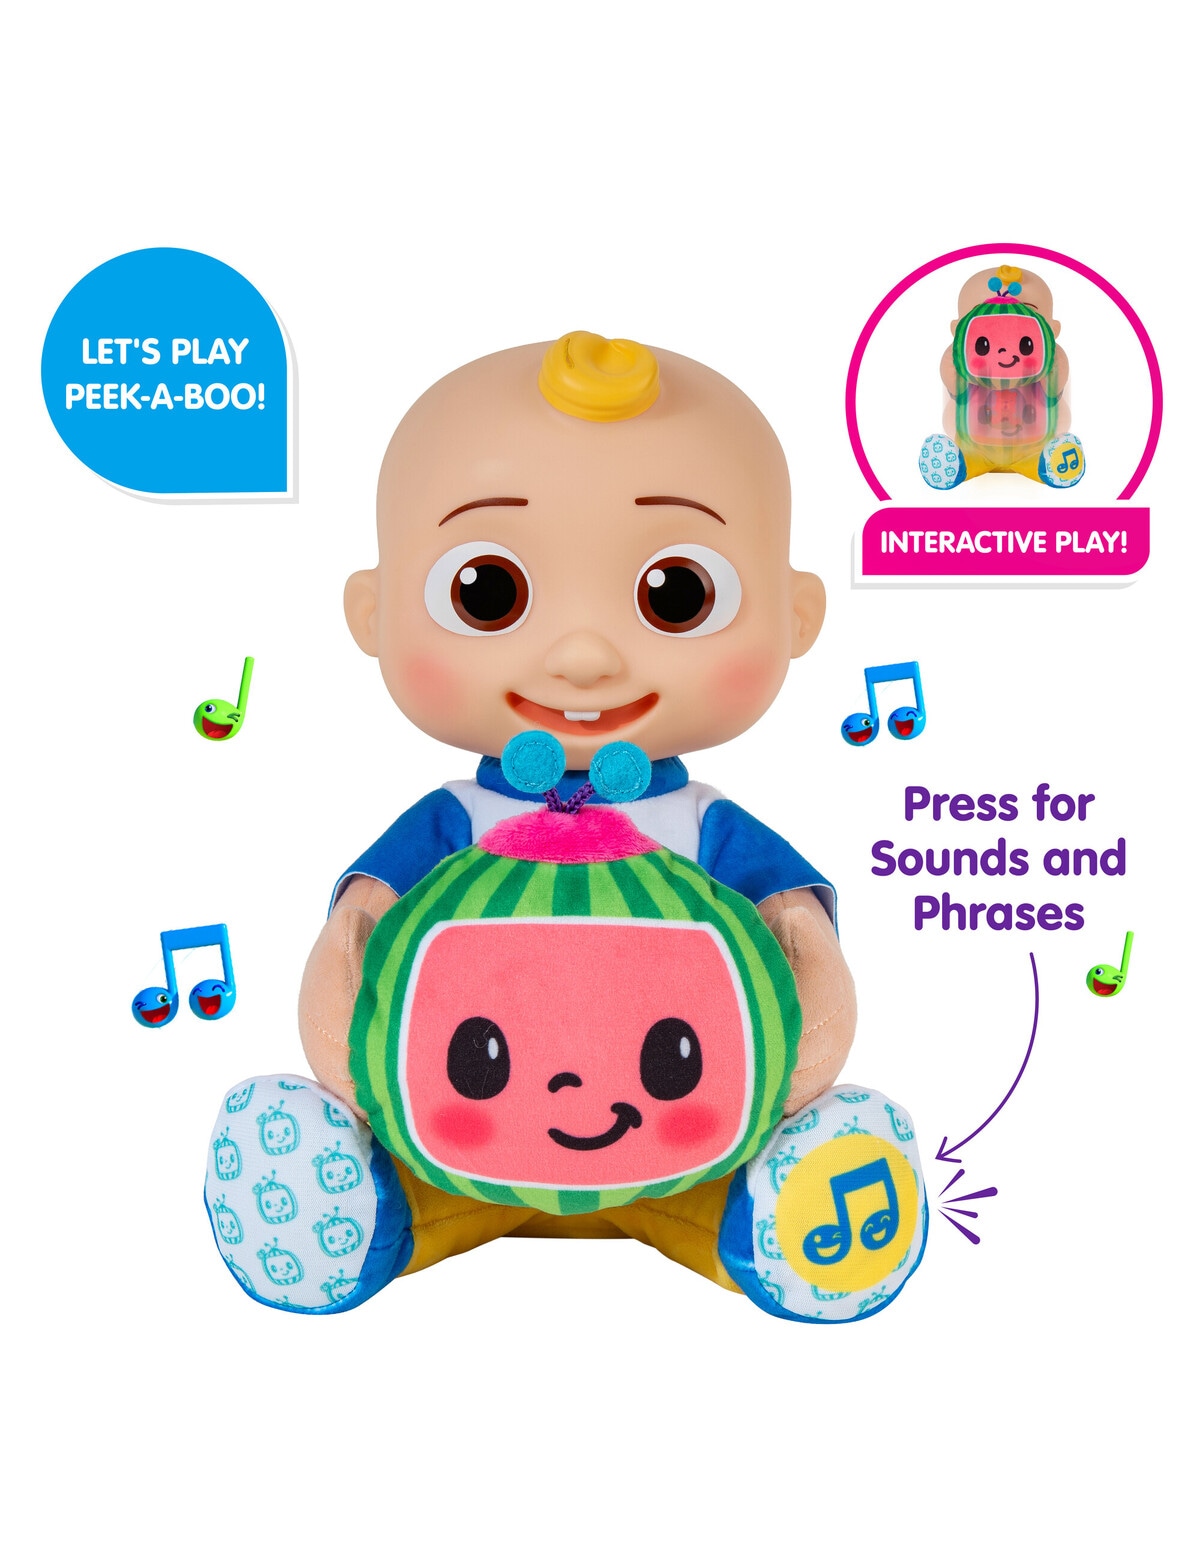 Cocomelon Peek-A-Boo JJ 10” Feature Plush - Featuring Favorite Song,  Phrases, and Sounds - Play Peek-A-Boo with JJ - Toys for Preschool and Kids  